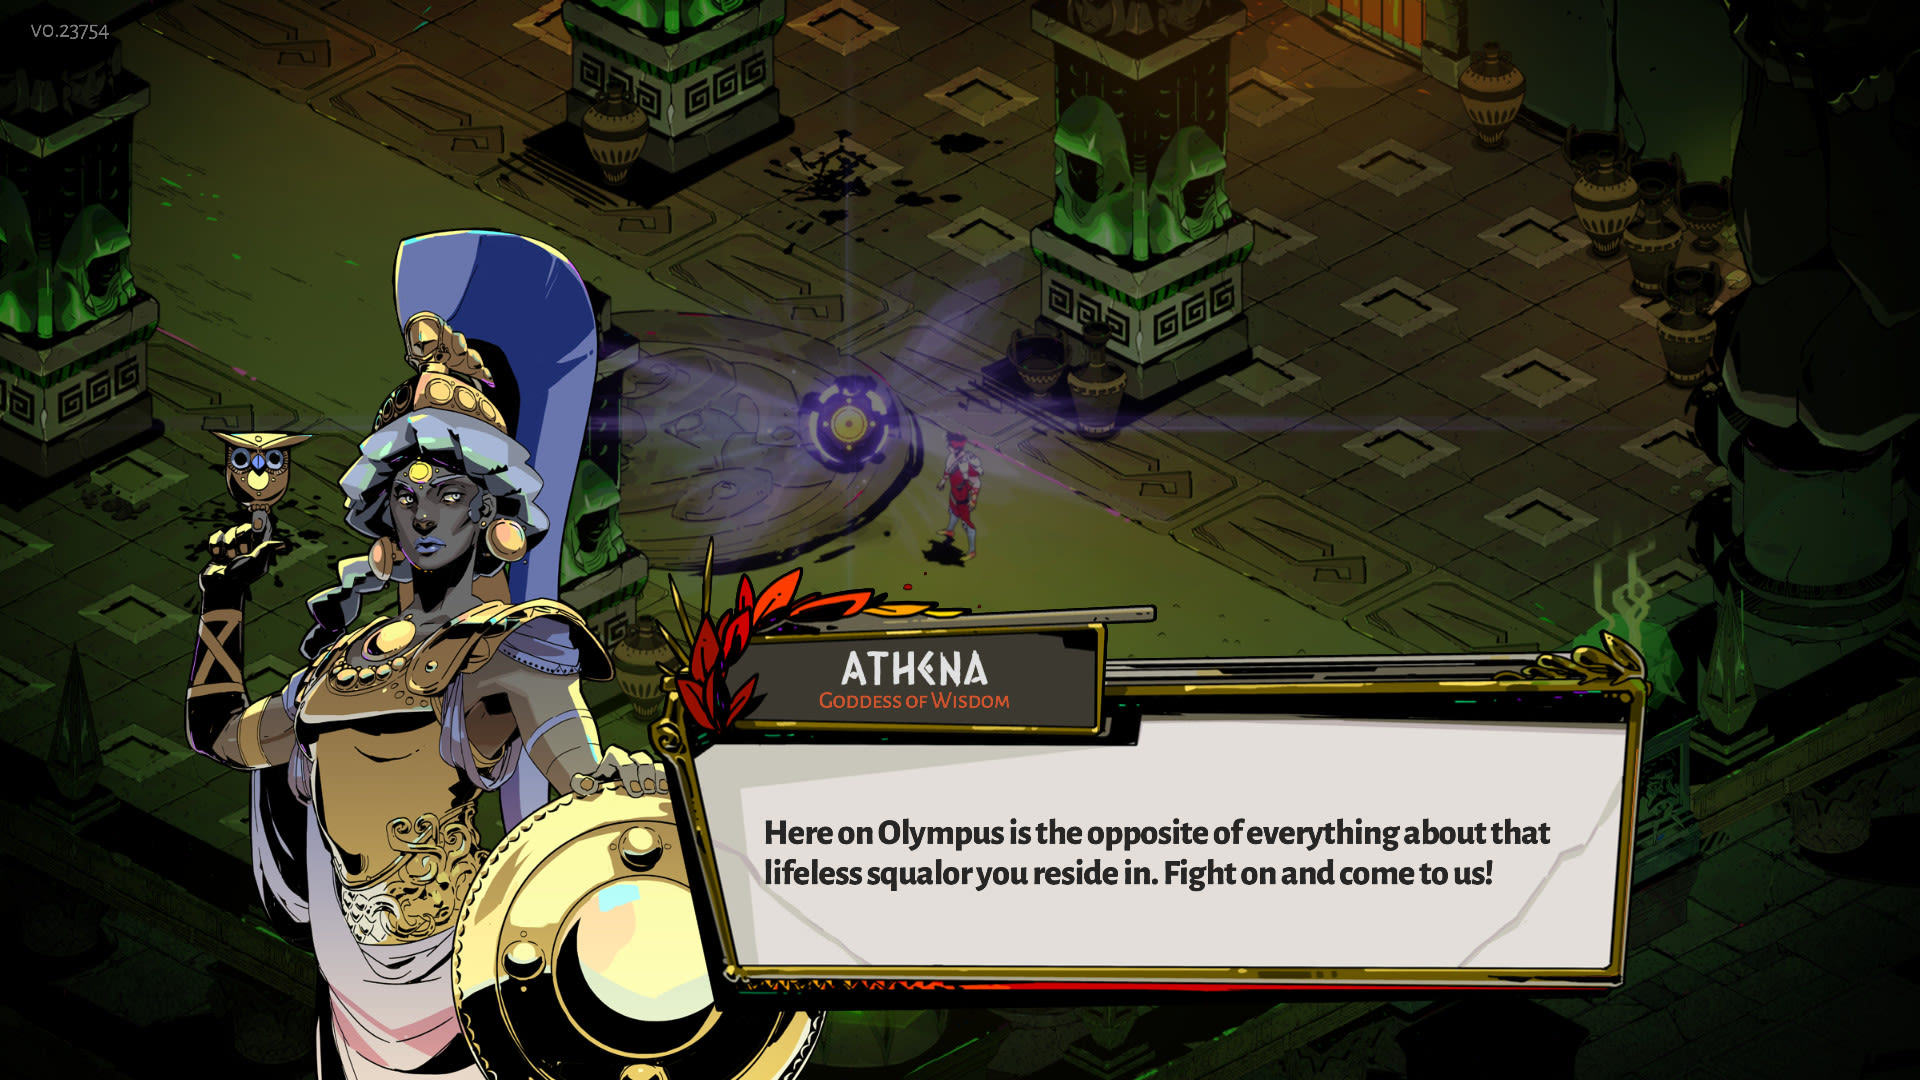 Dialogue from the game